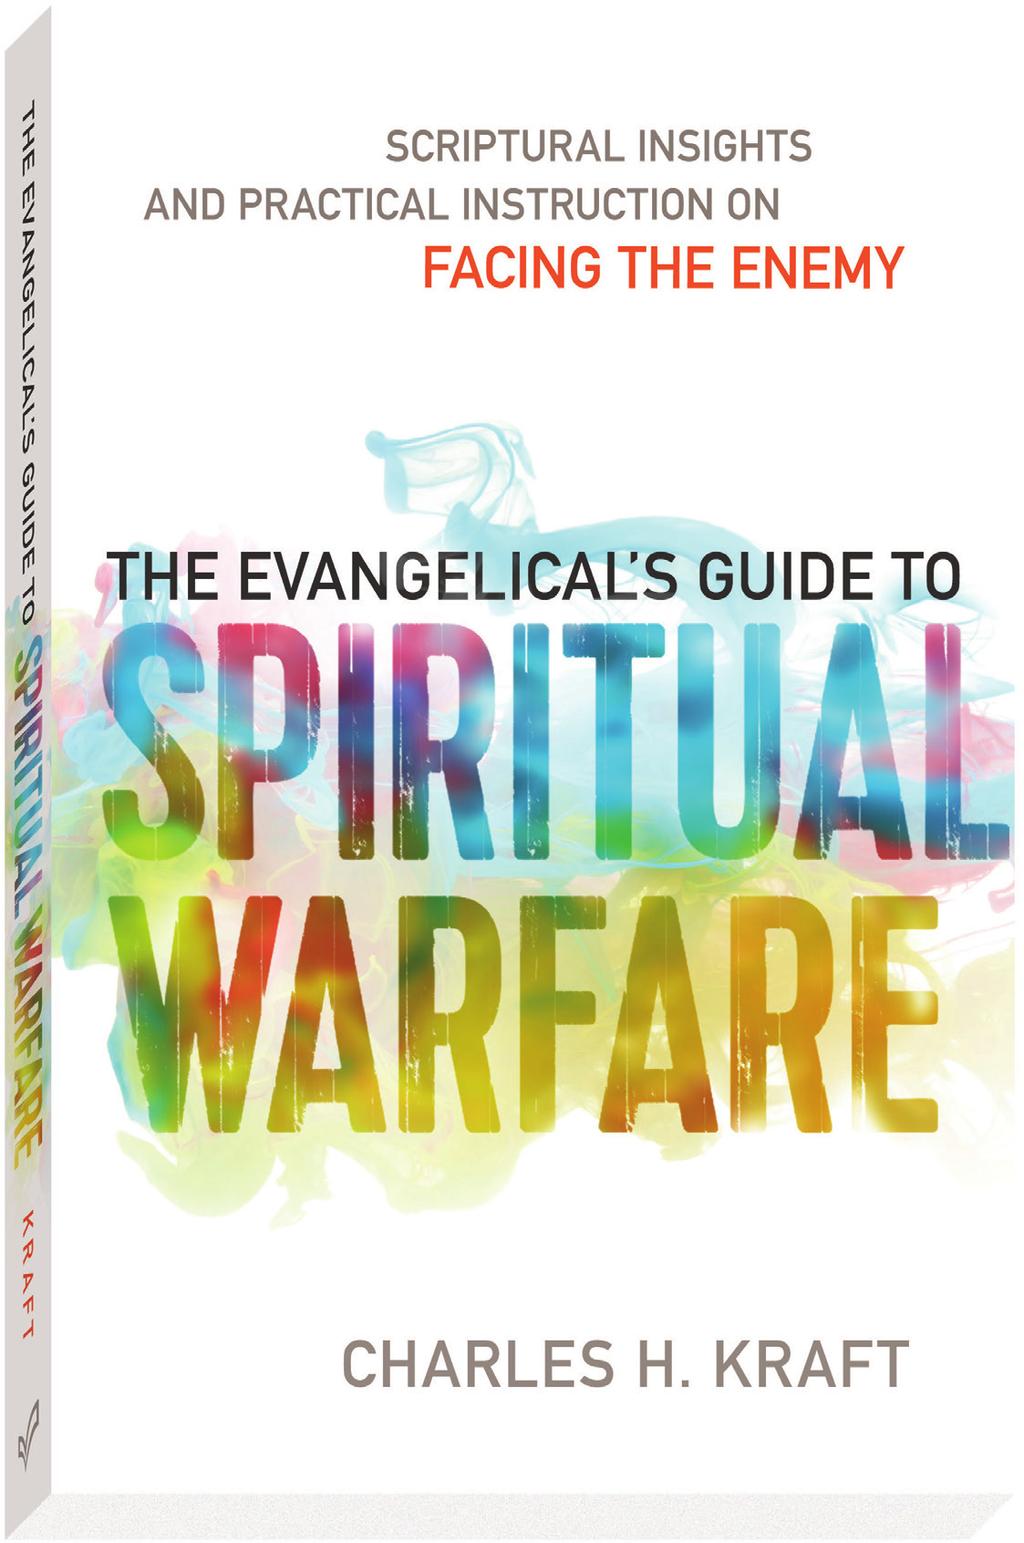 FEBRUARY Scriptural Insights and Practical Instruction on Facing the Enemy Author speaks around the world to all denominations about spiritual warfare, healing, and deliverance Written in a very